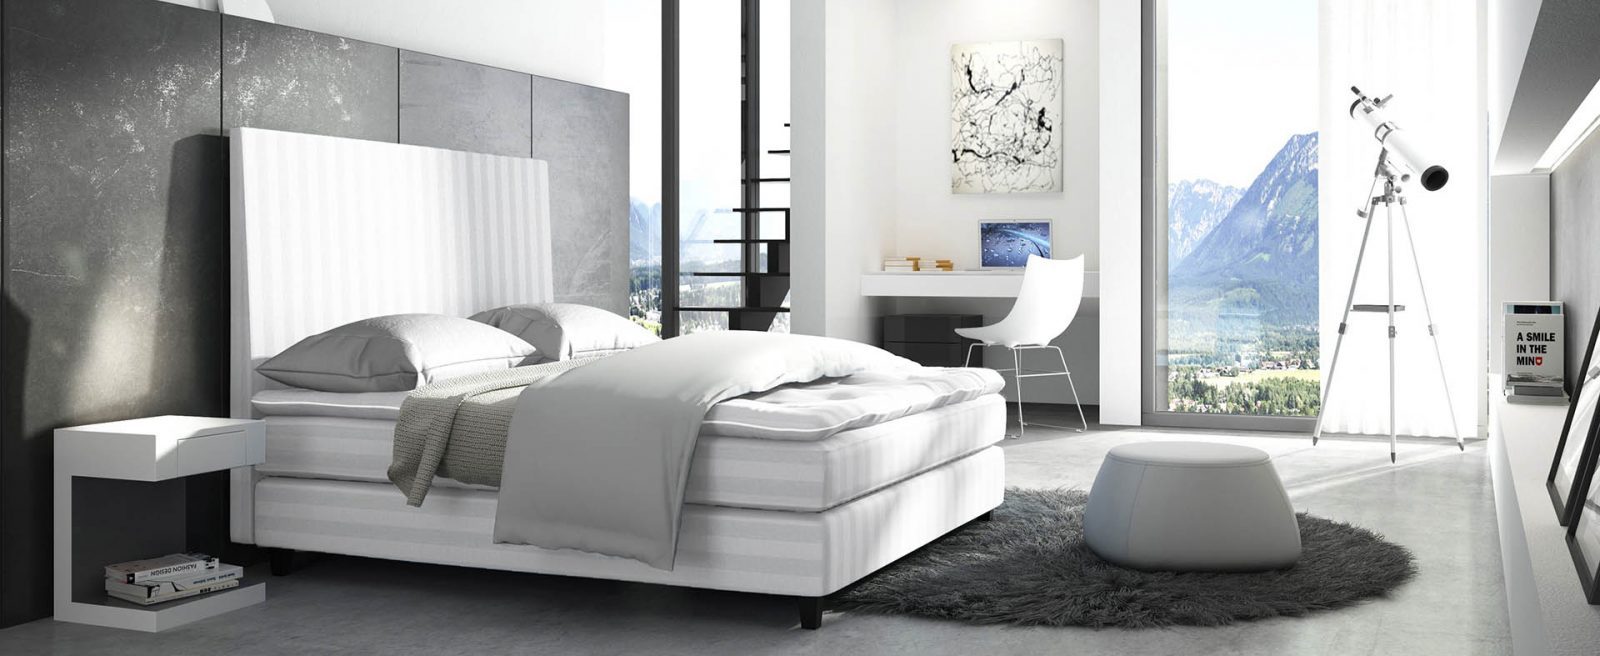 pauly-beds-continental-luxury-mattress-sophia-small